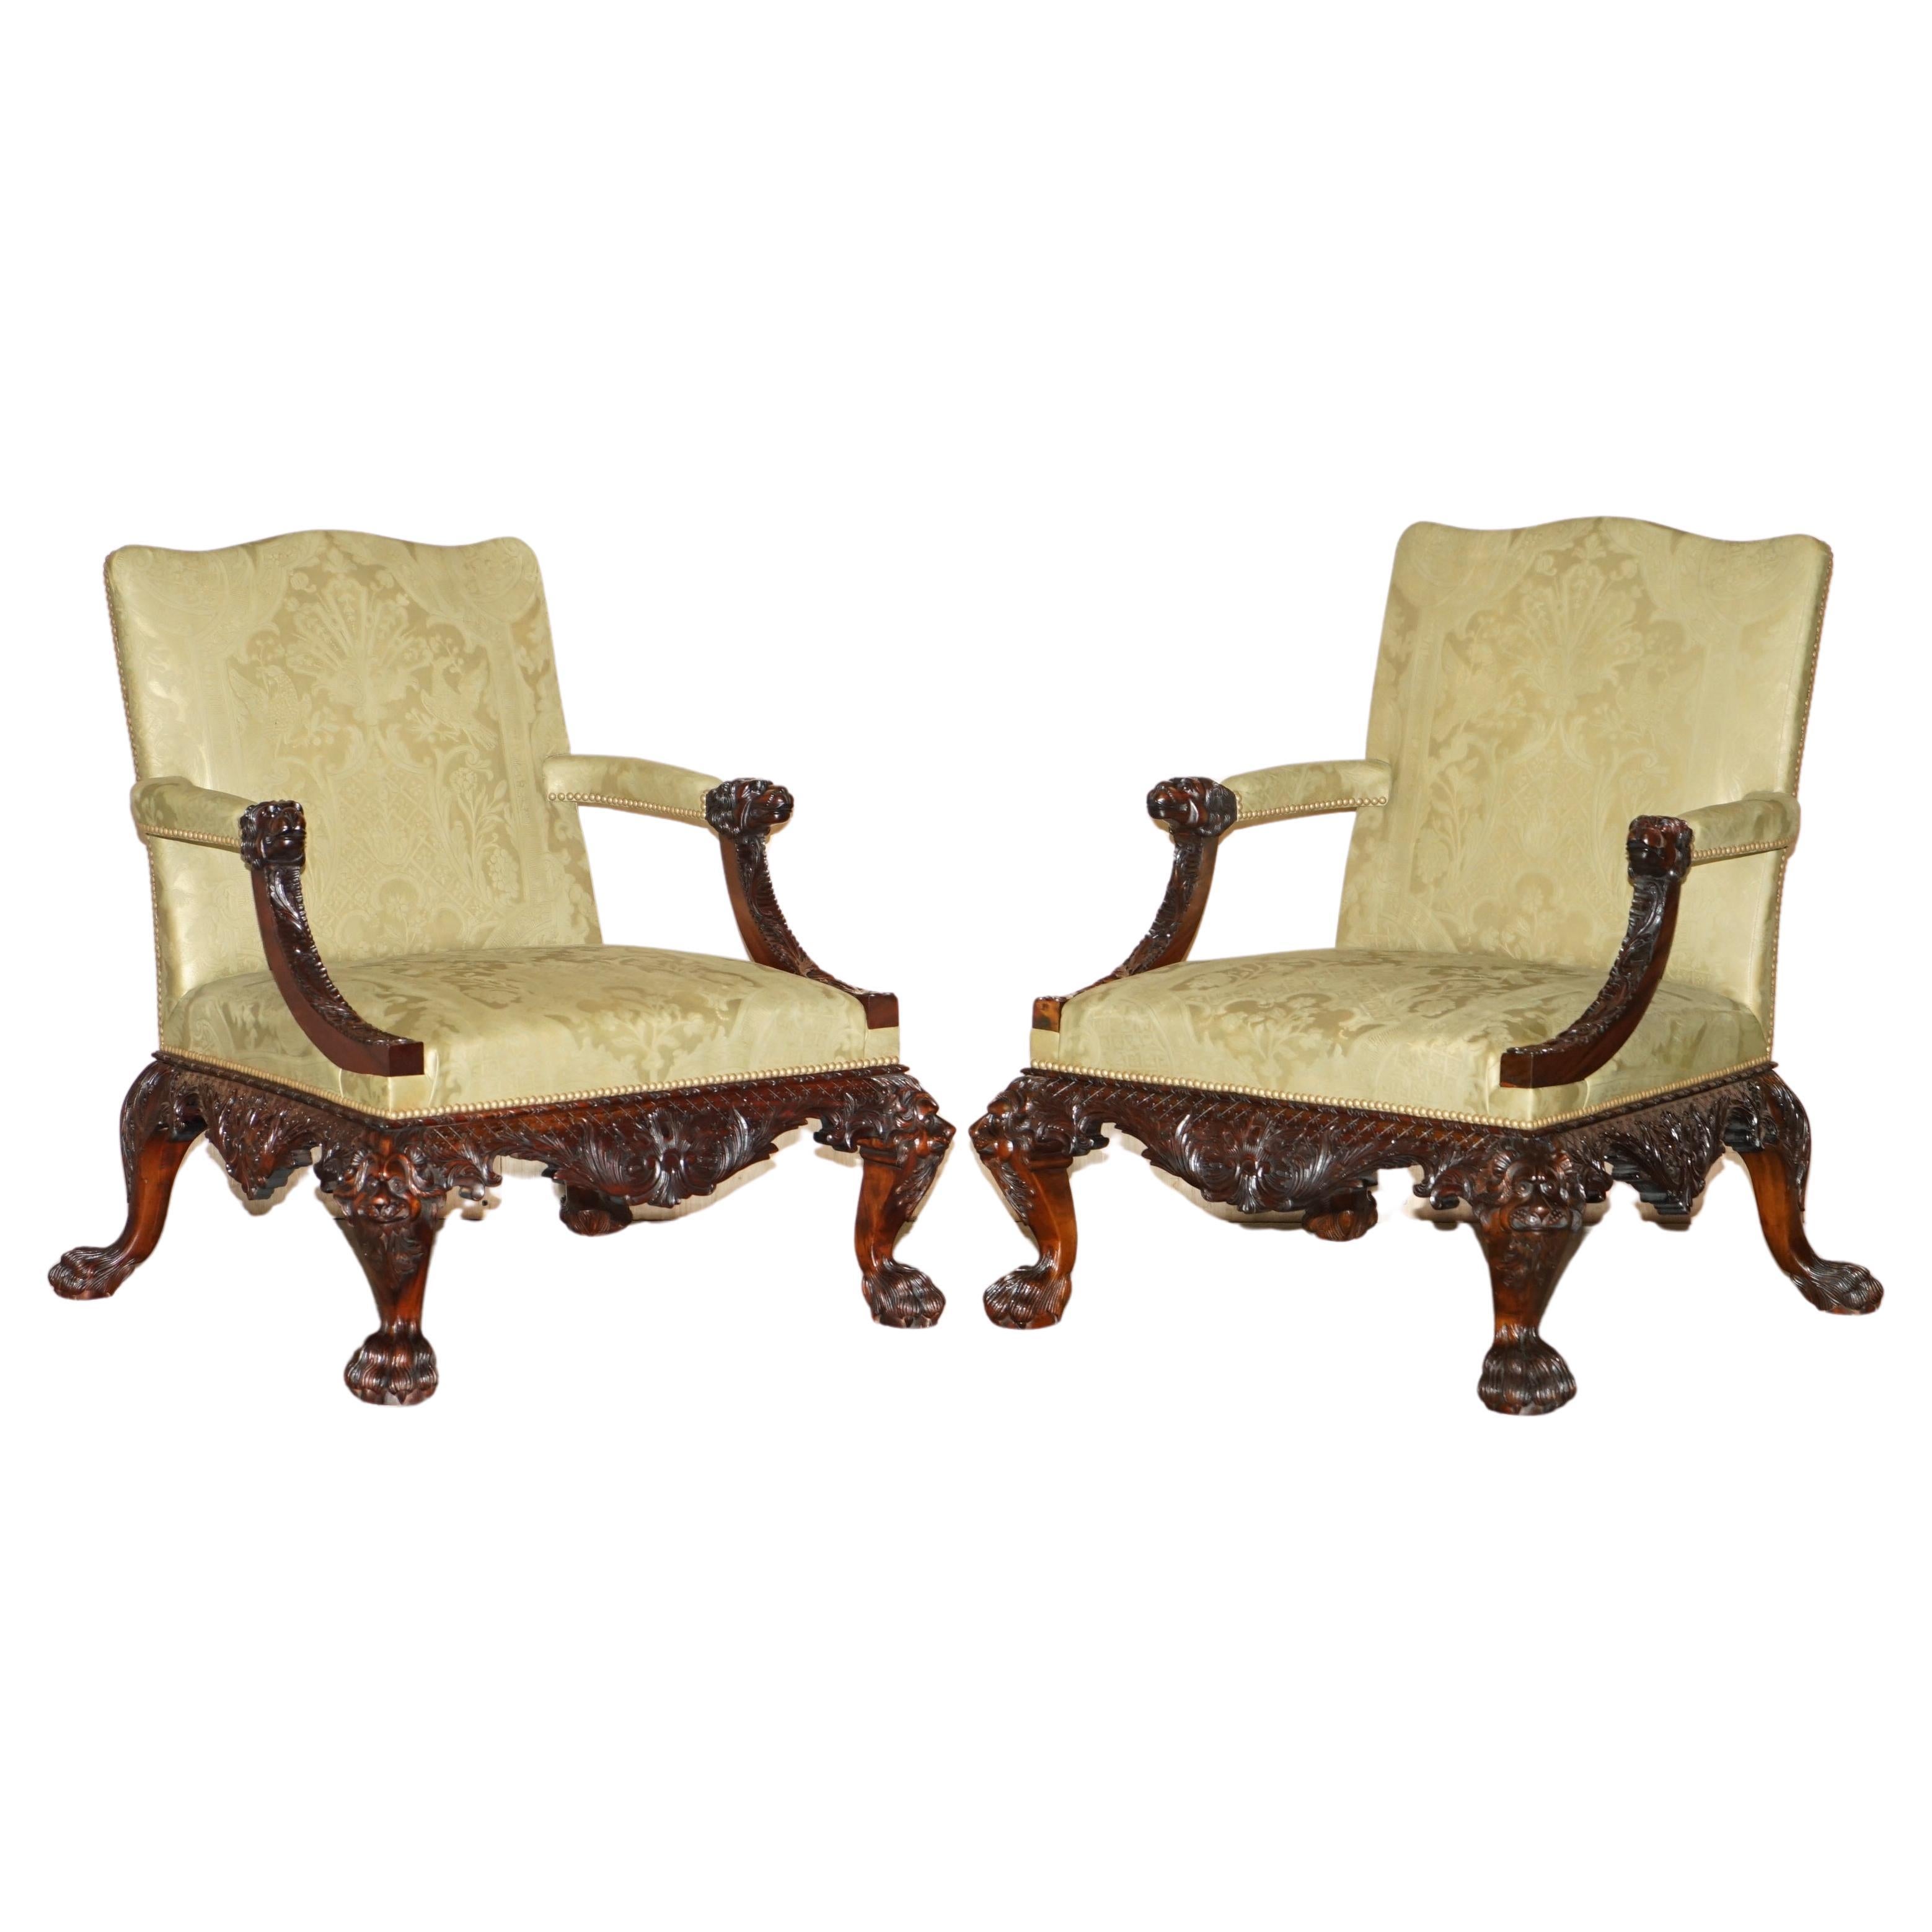 FINE PAiR OF LARGE CARVED GAINSBOROUGH ARMCHAIRS AFTER GILES GRENDEY 1693-1780